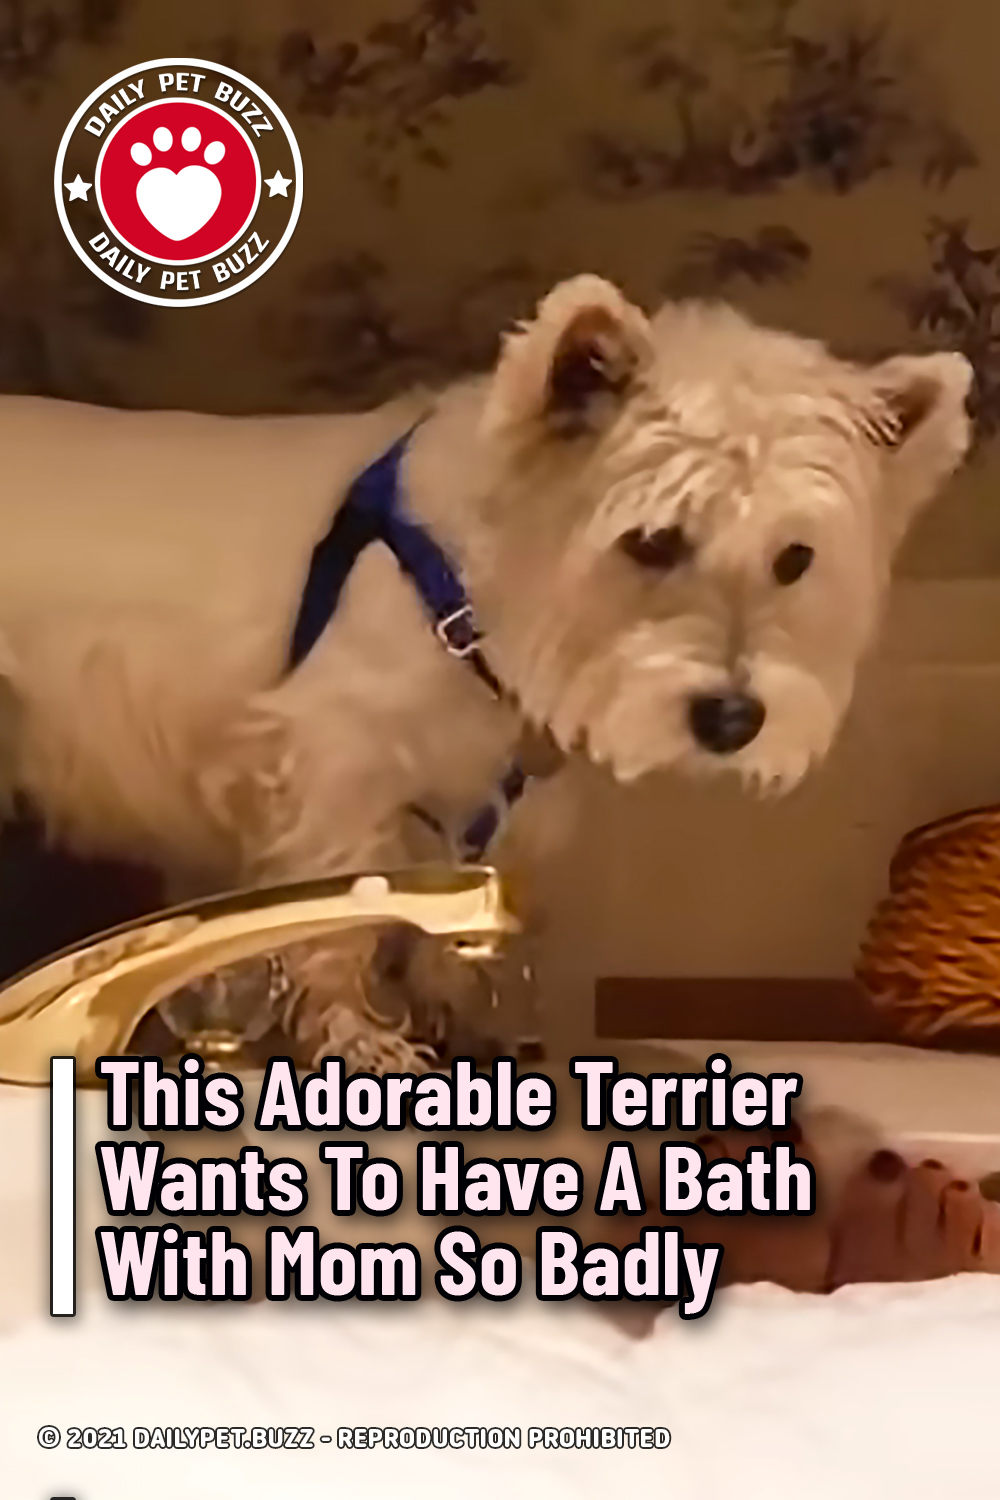 This Adorable Terrier Wants To Have A Bath With Mom So Badly